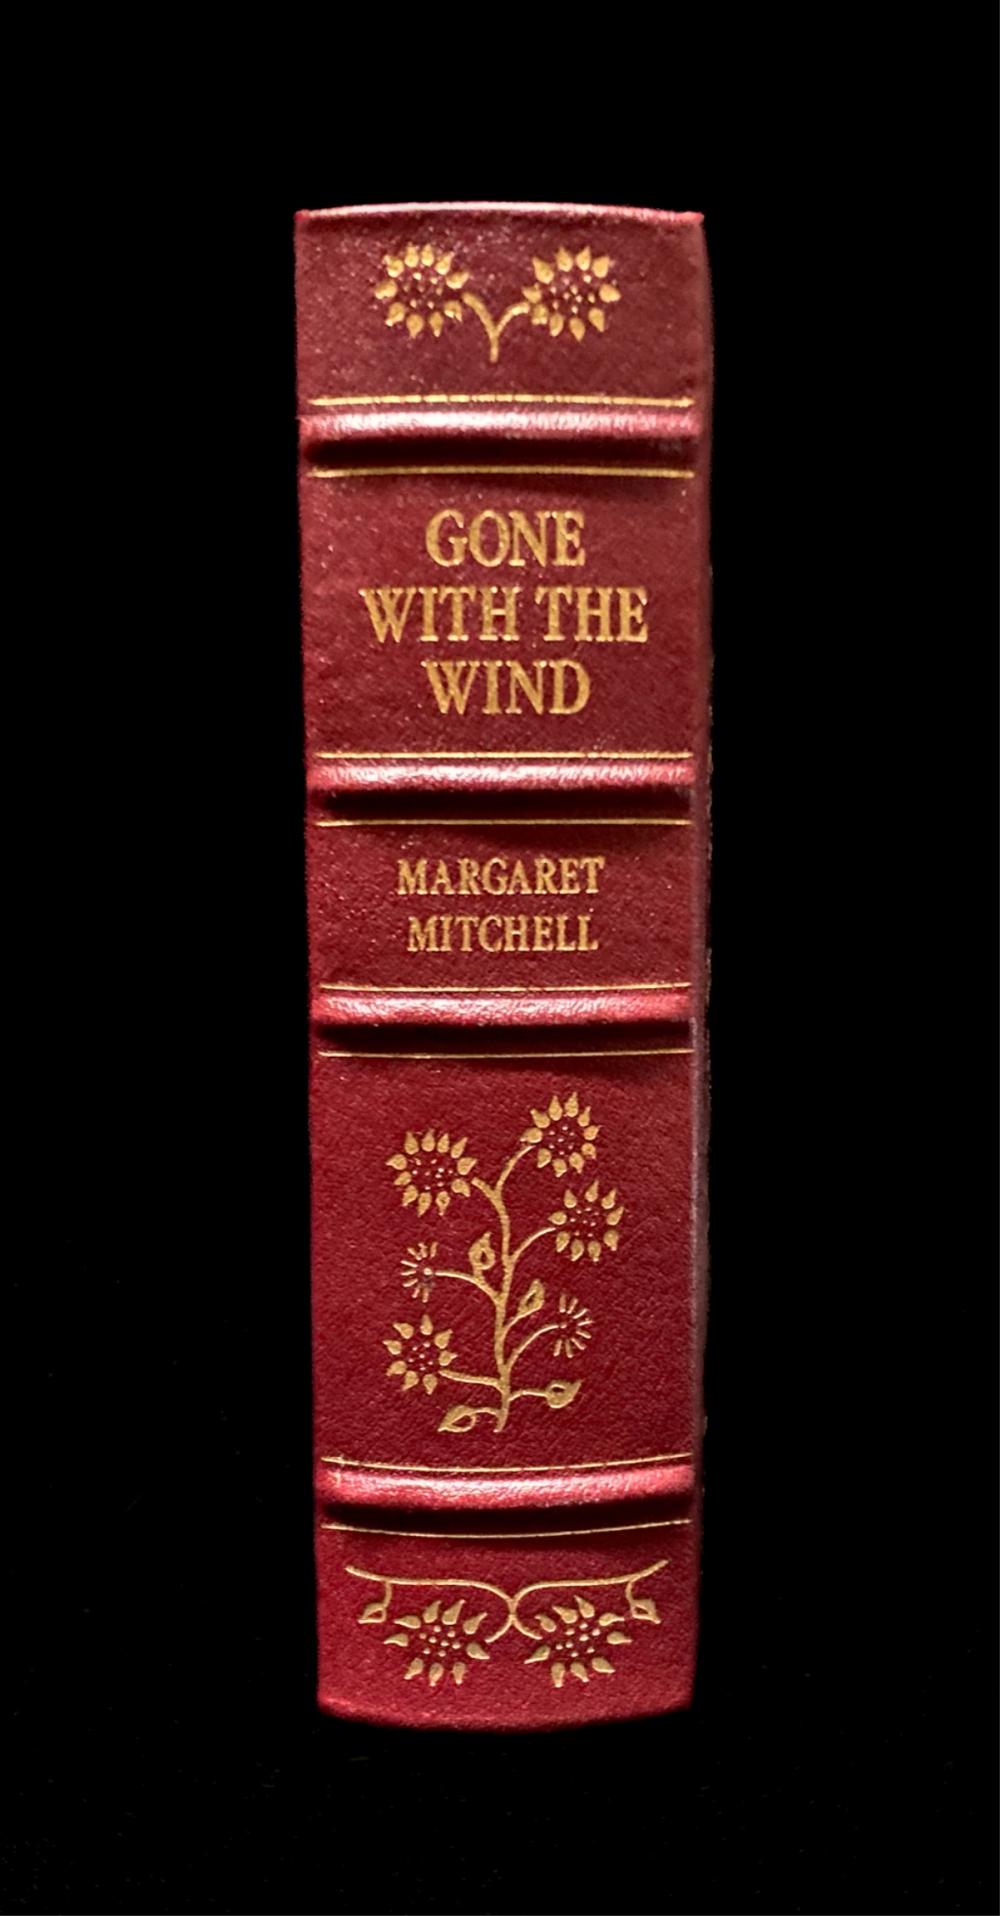 GONE WITH THE WIND BY MARGARET 2ffe7d